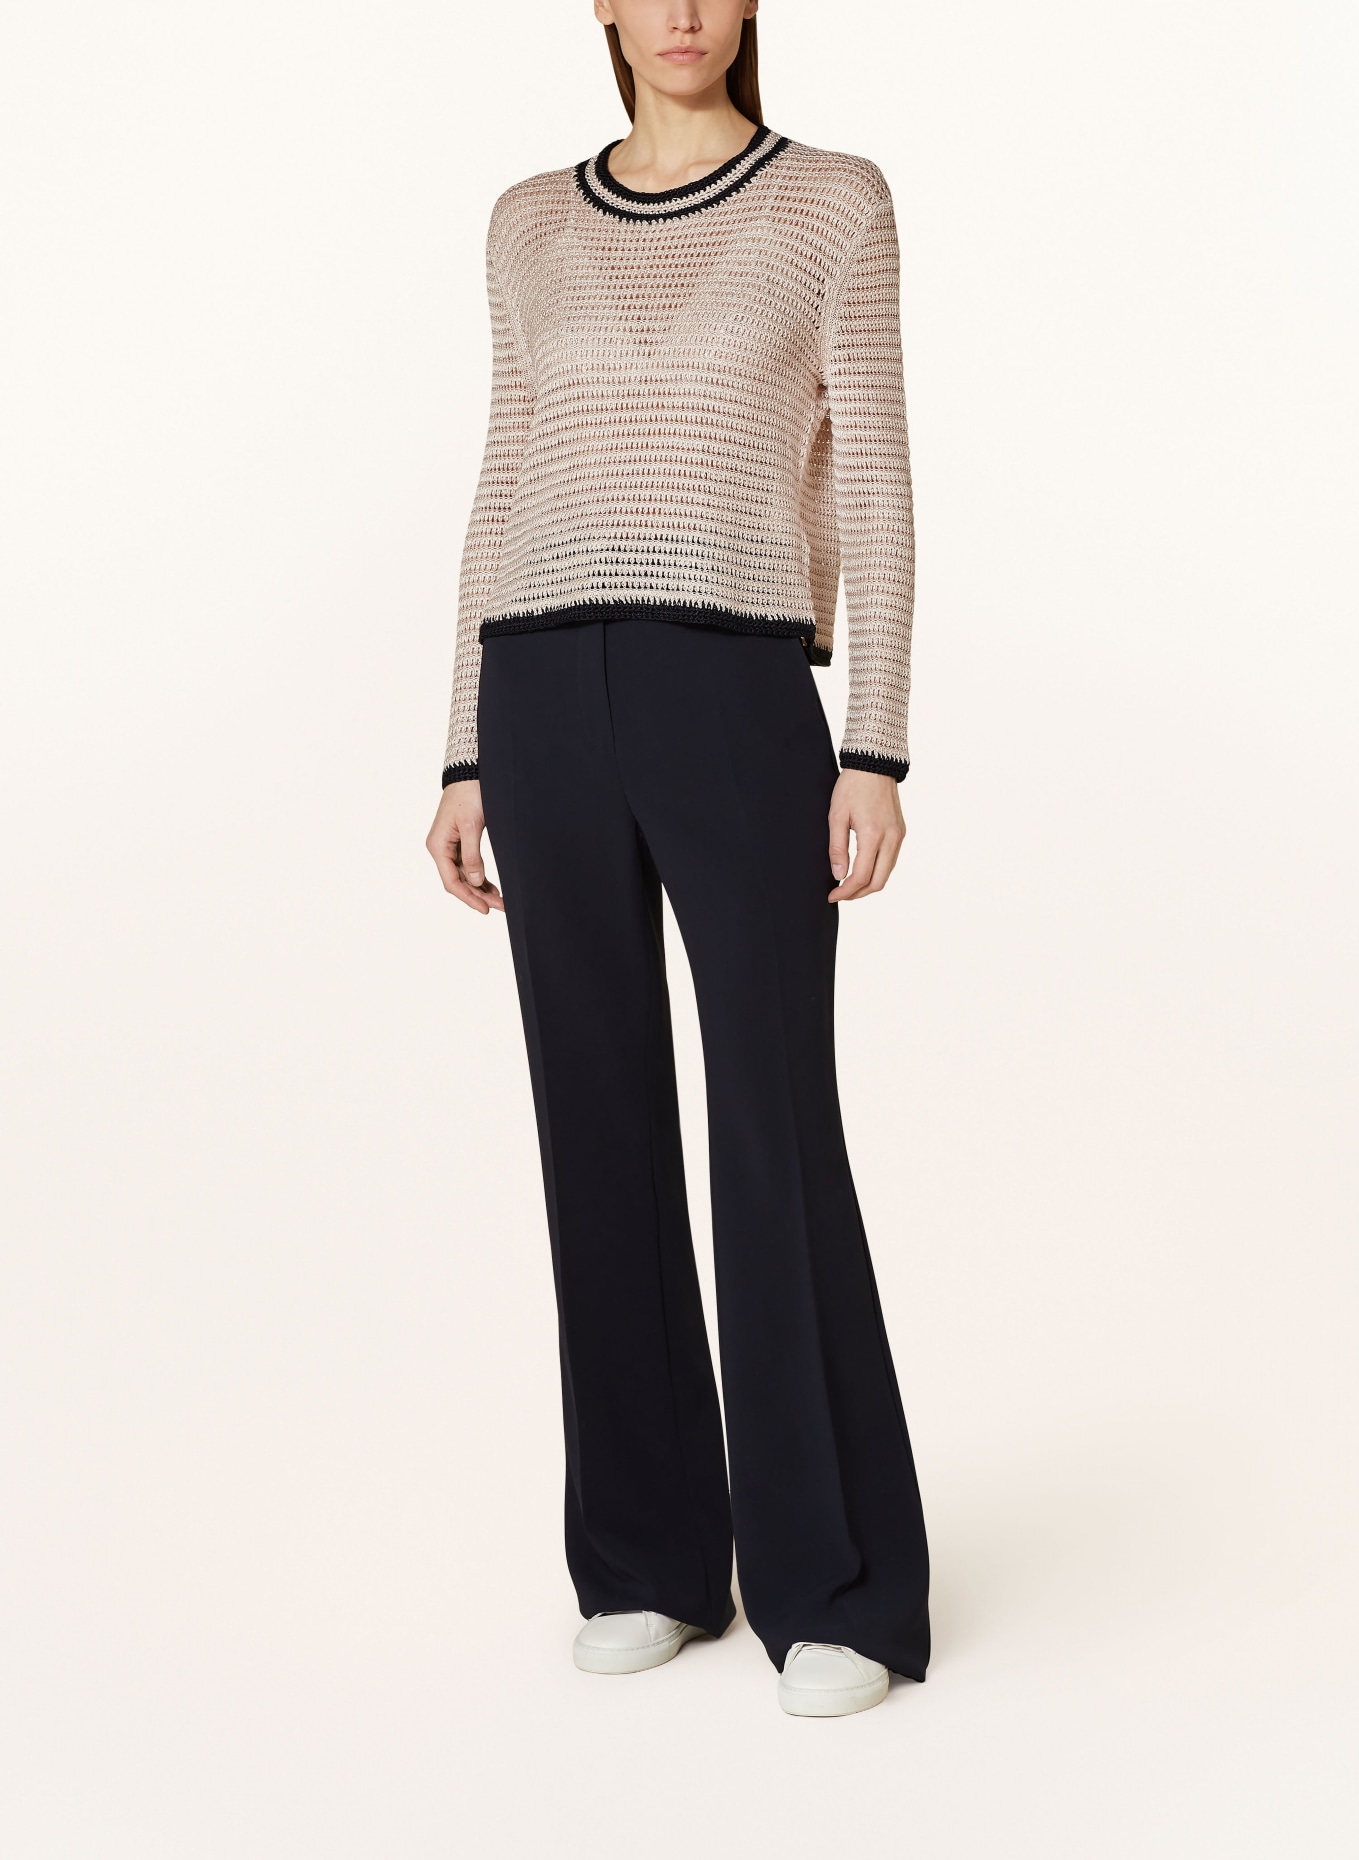 REISS Sweater ASTRID with linen, Color: LIGHT BROWN/ BLACK (Image 2)